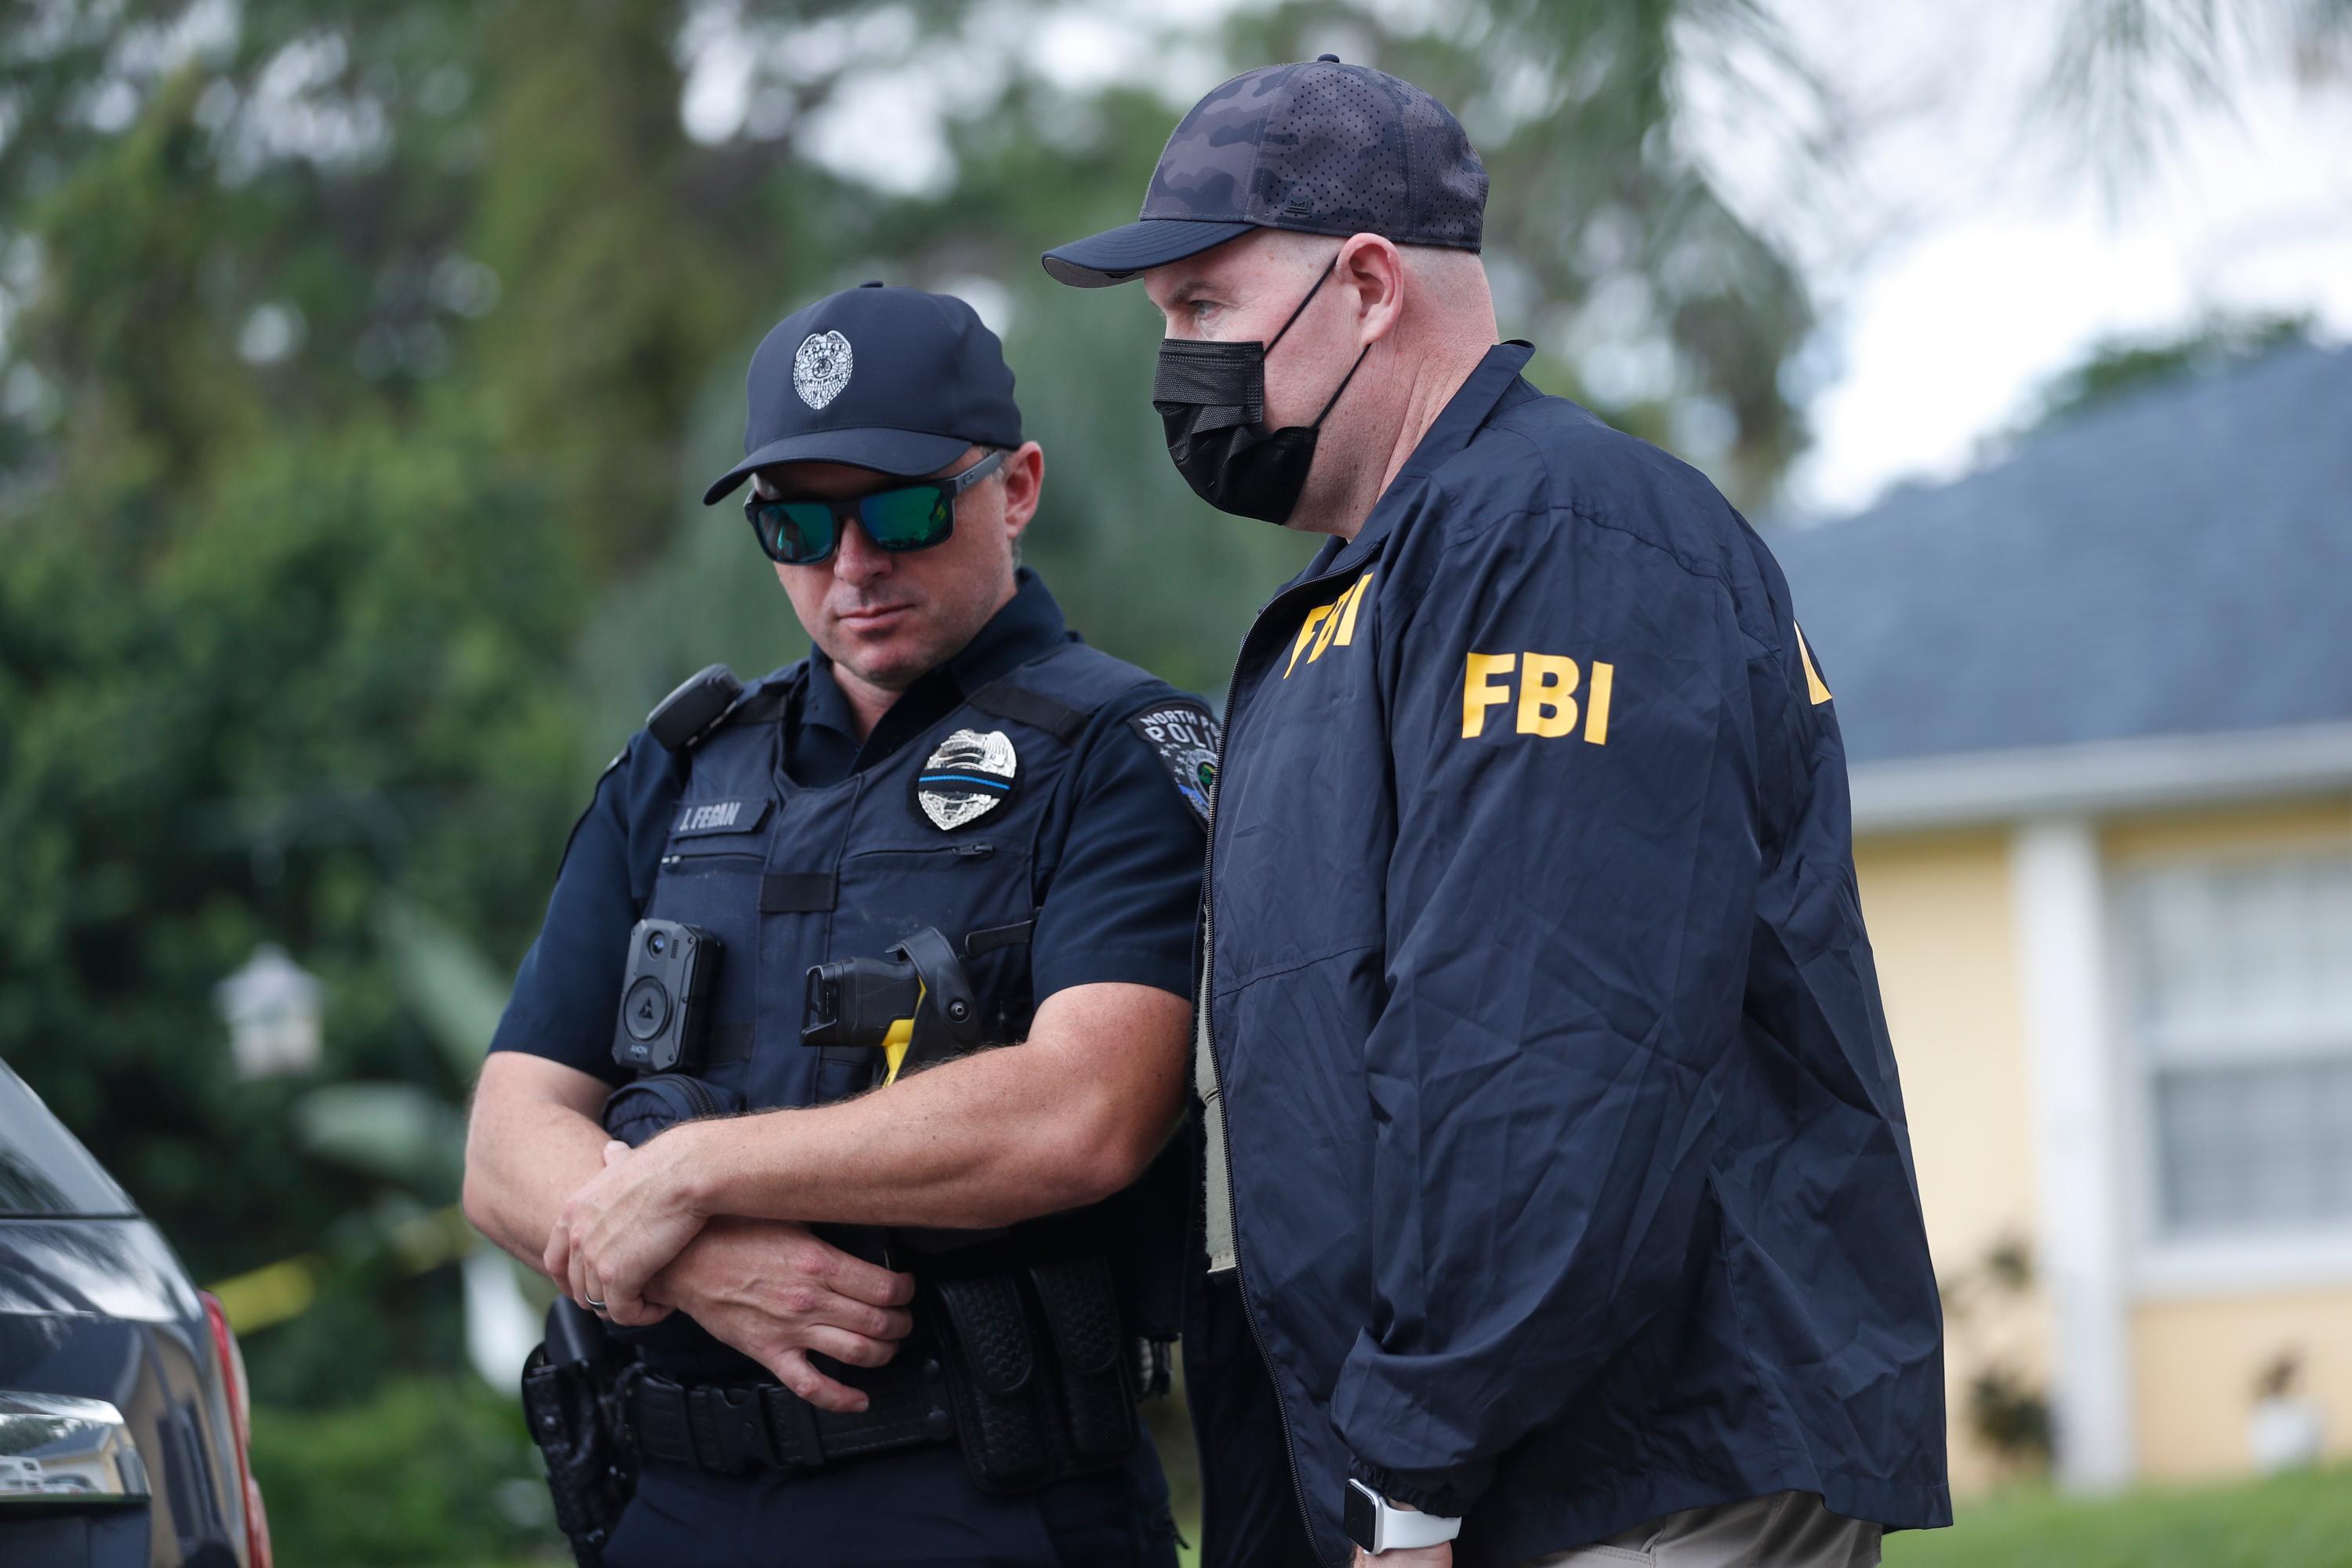 Does the FBI Really Operate Internationally? Here's What We Know